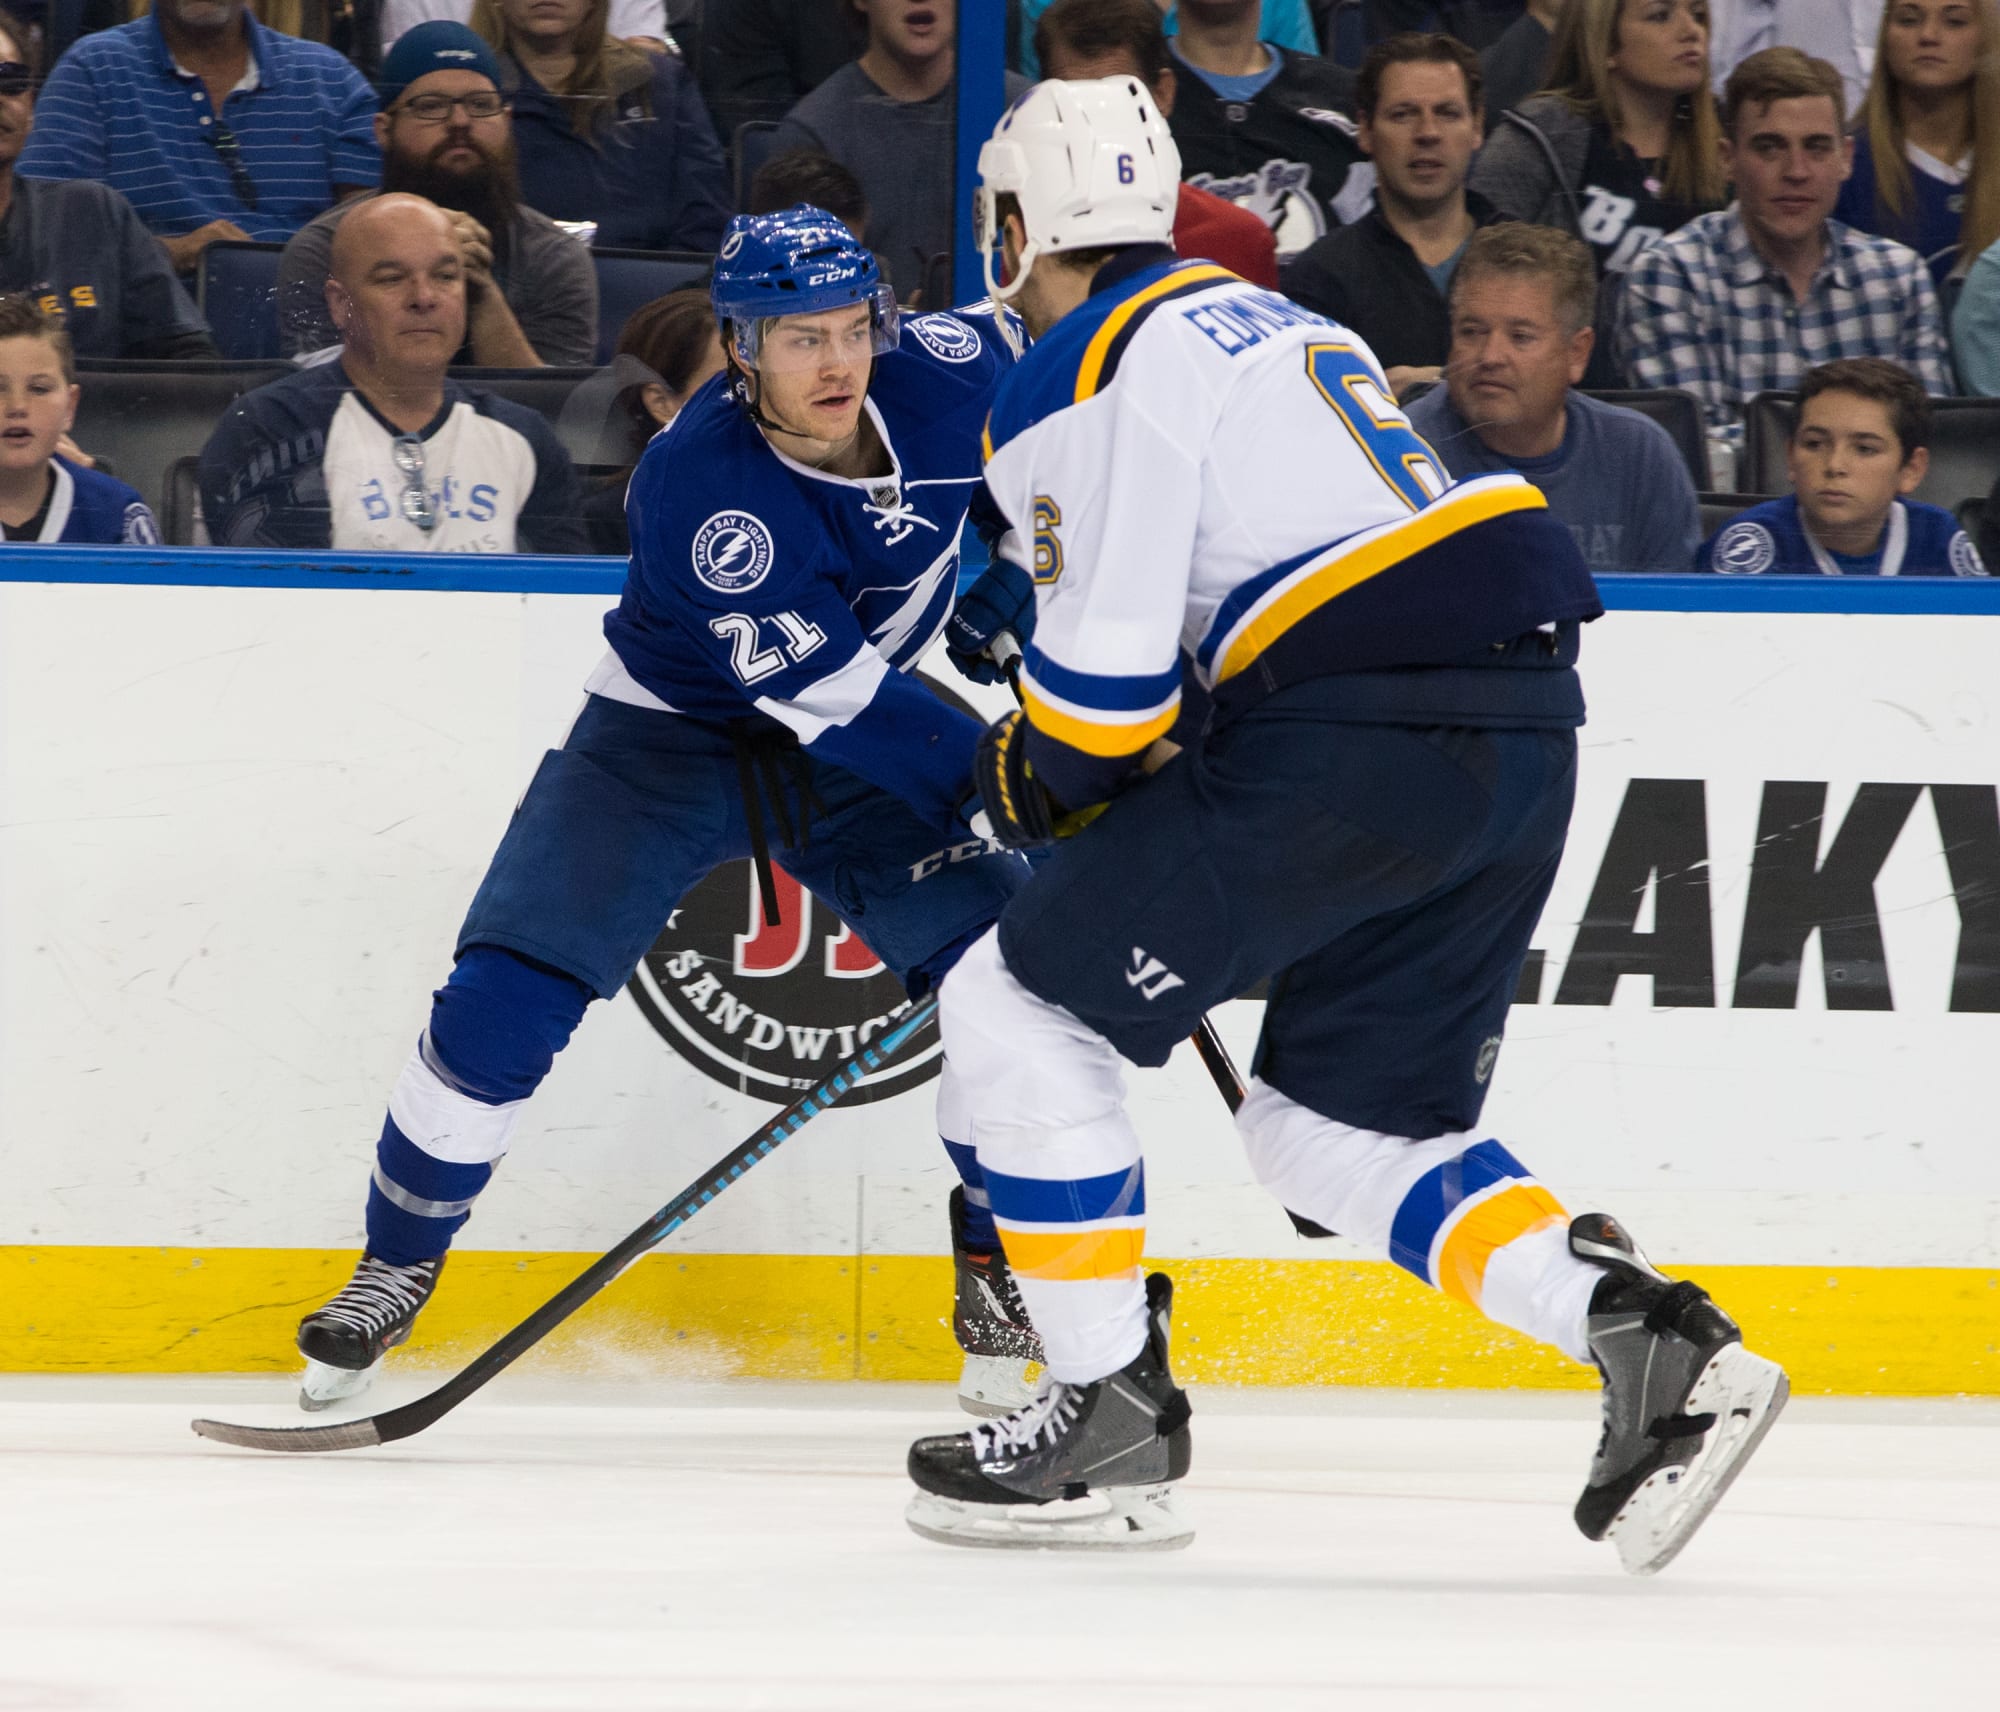 Tampa Bay Lightning vs. St. Louis Blues: Live Stream, TV Info, and more